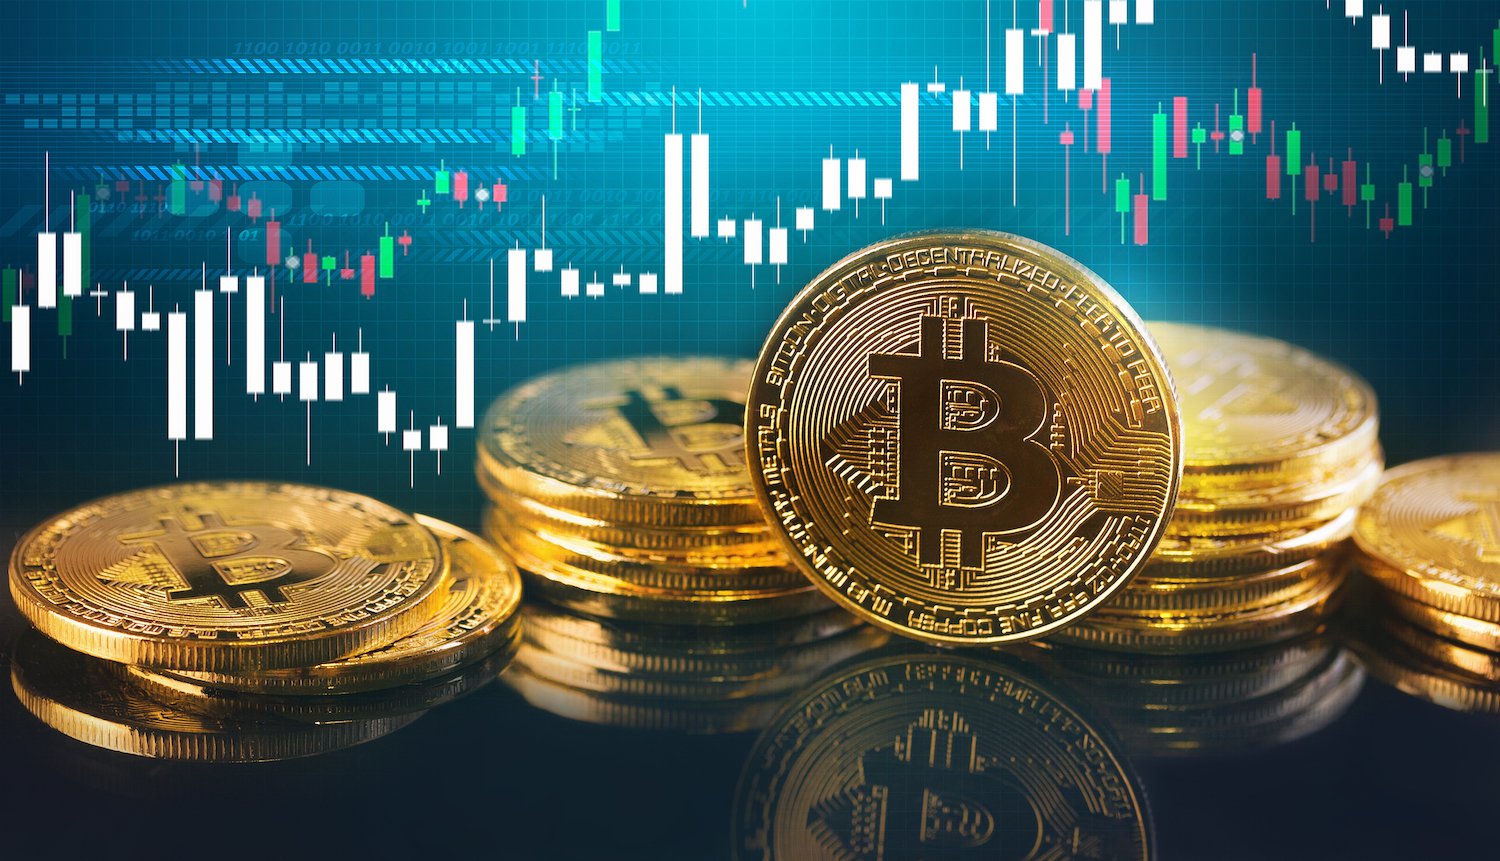 This Bitcoin Price Chart May Give Early Warning Of Next Bull Reversal